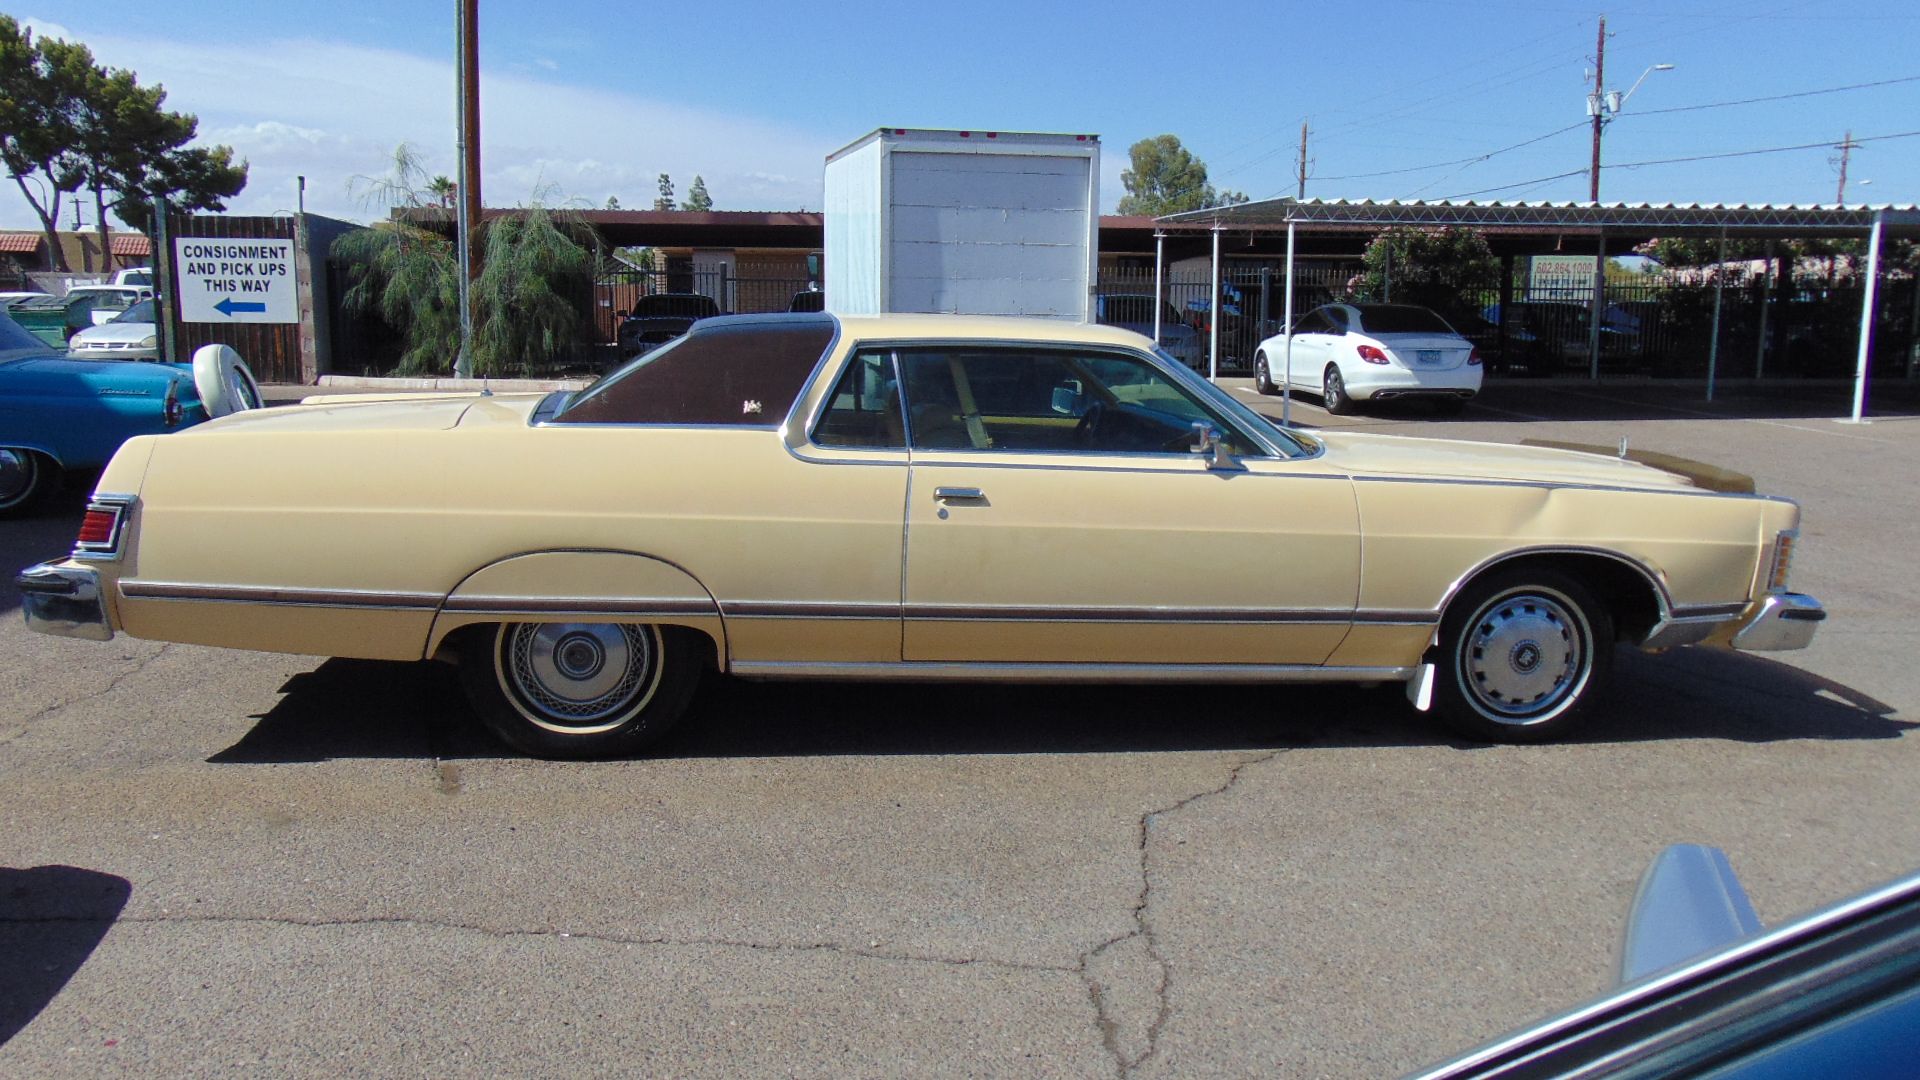 1978 MERCURY GRAND MARQUIS, ODOMETER READING 12,838, VIN. 8Z65S644505, 351M GAS, AUTO TRANS, FWD, CR - Image 6 of 13